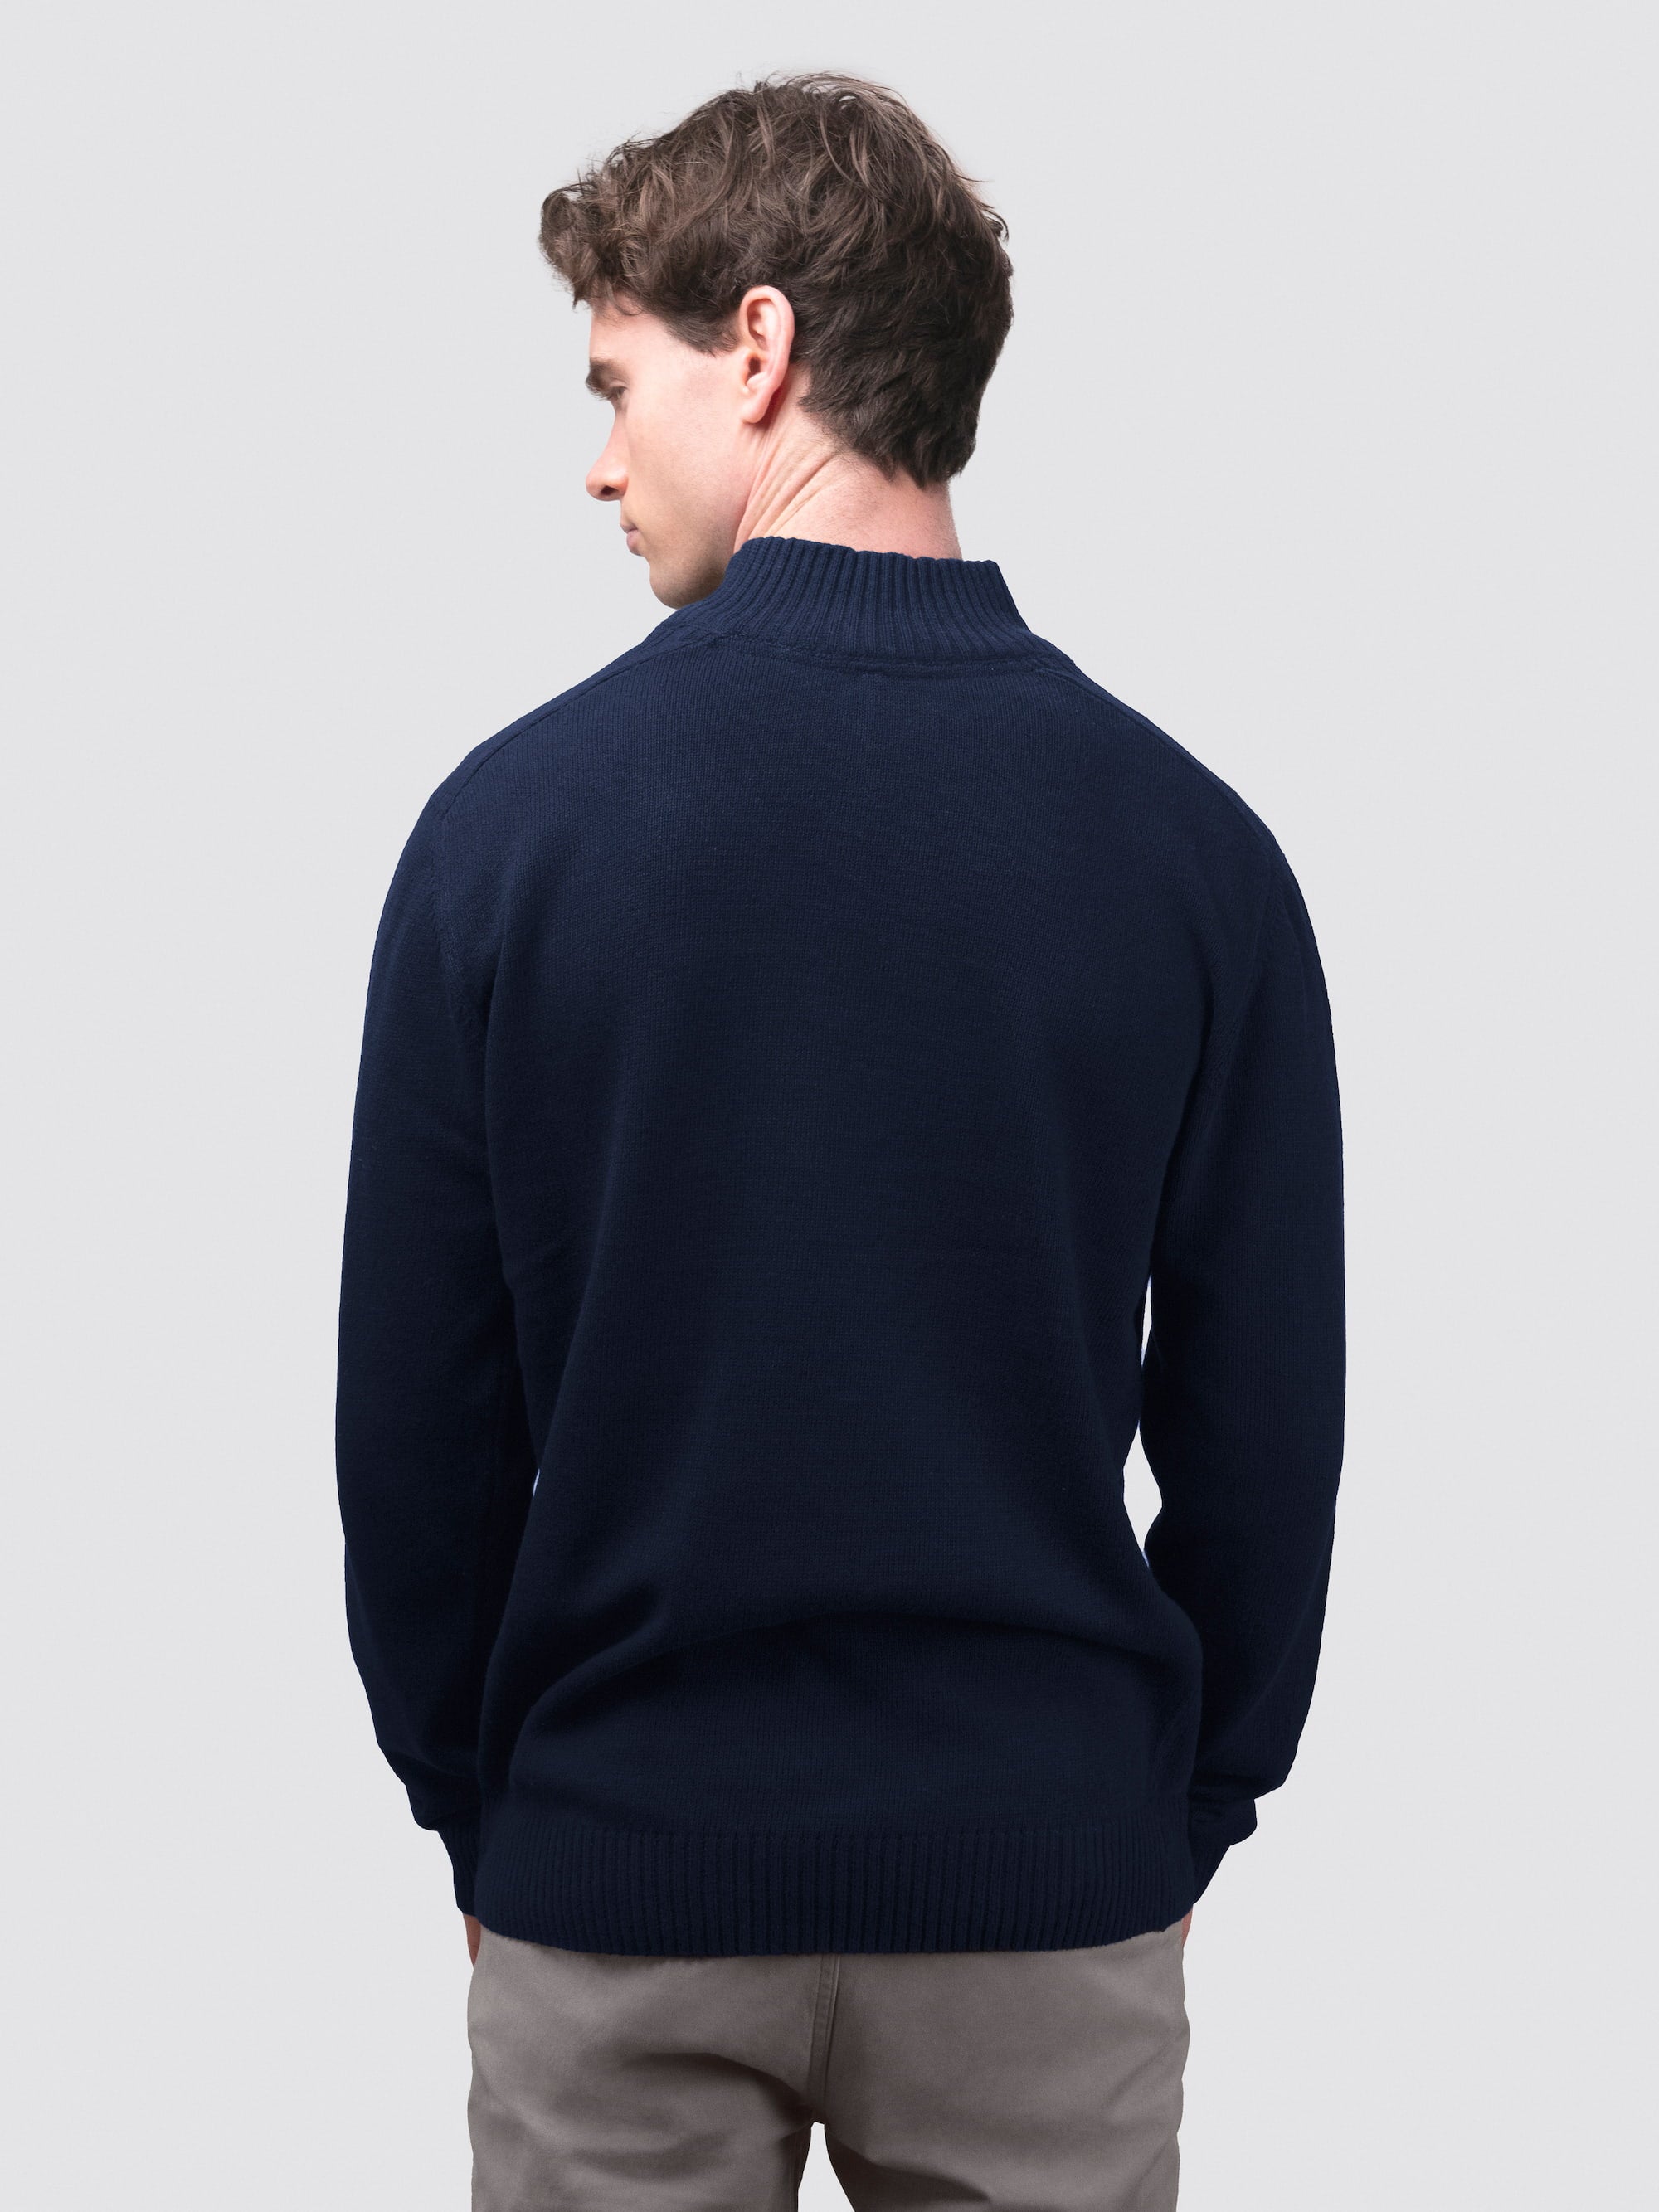 Navy zip-neck jumper made from regenerated cotton and polyester